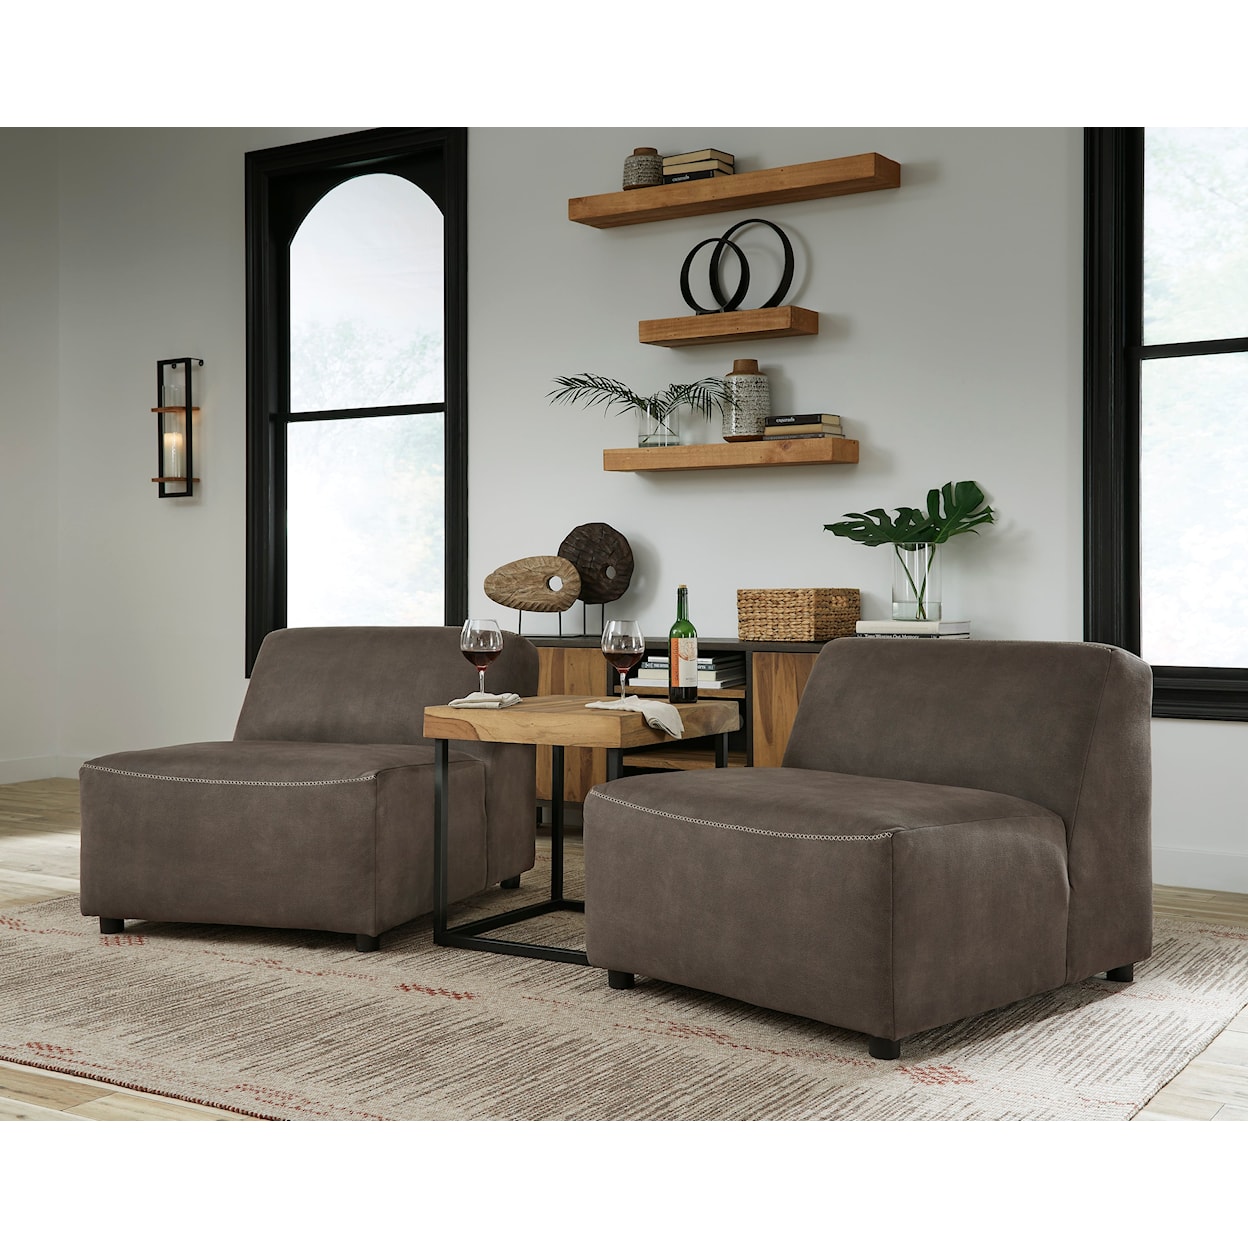 Signature Design by Ashley Allena 2-Piece Armless Loveseat